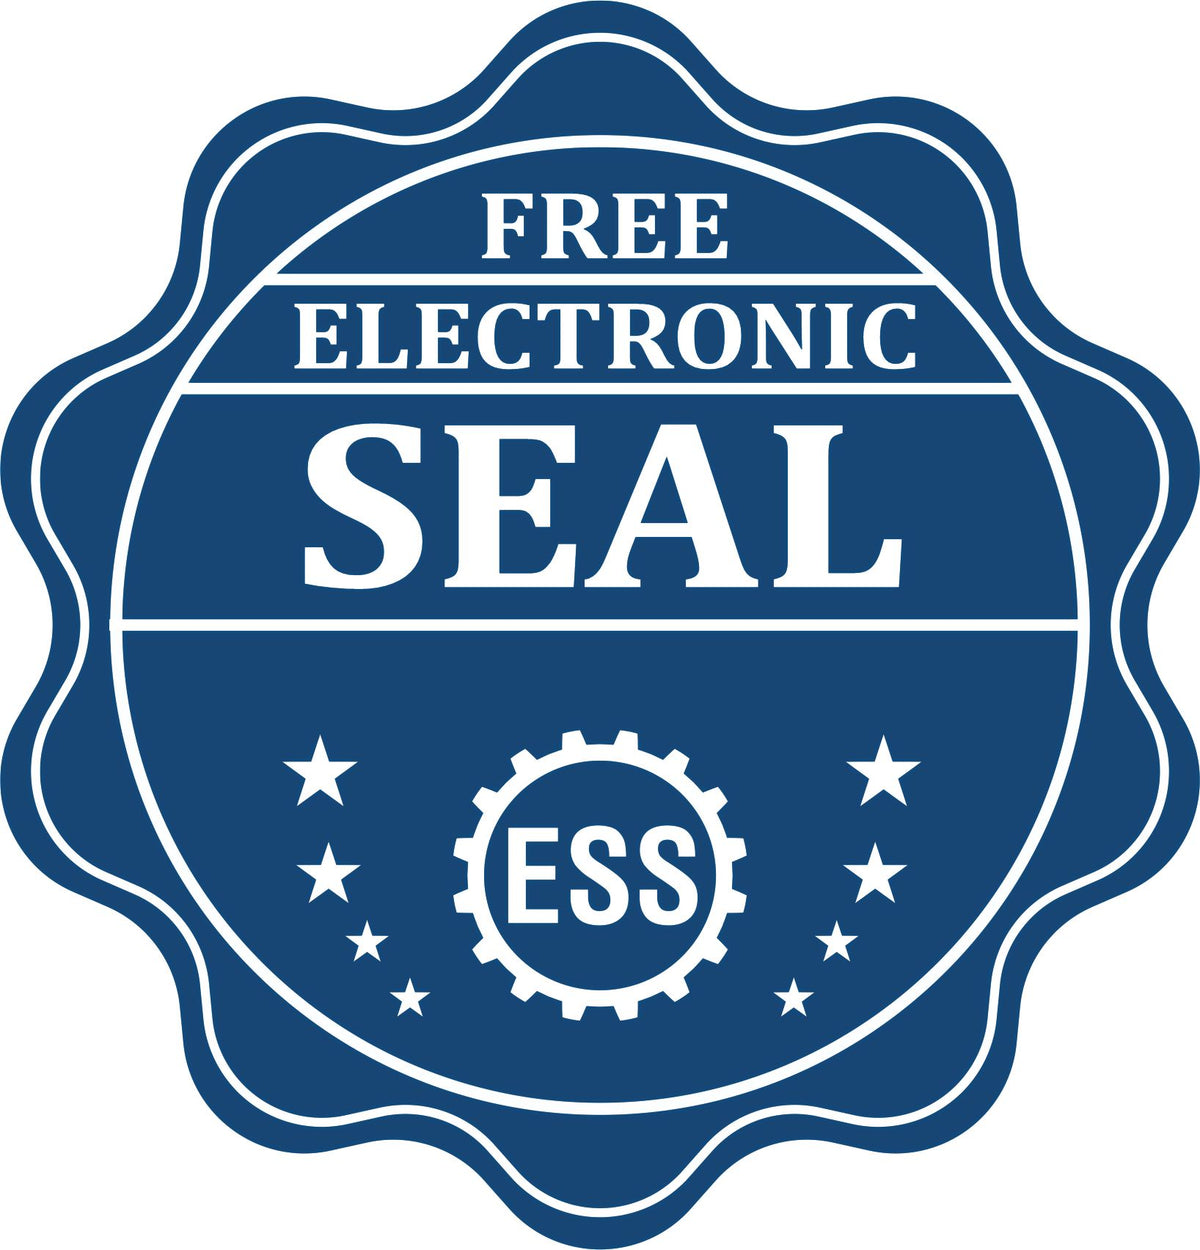 A badge showing a free electronic seal for the Soft Missouri Professional Geologist Seal with stars and the ESS gear on the emblem.